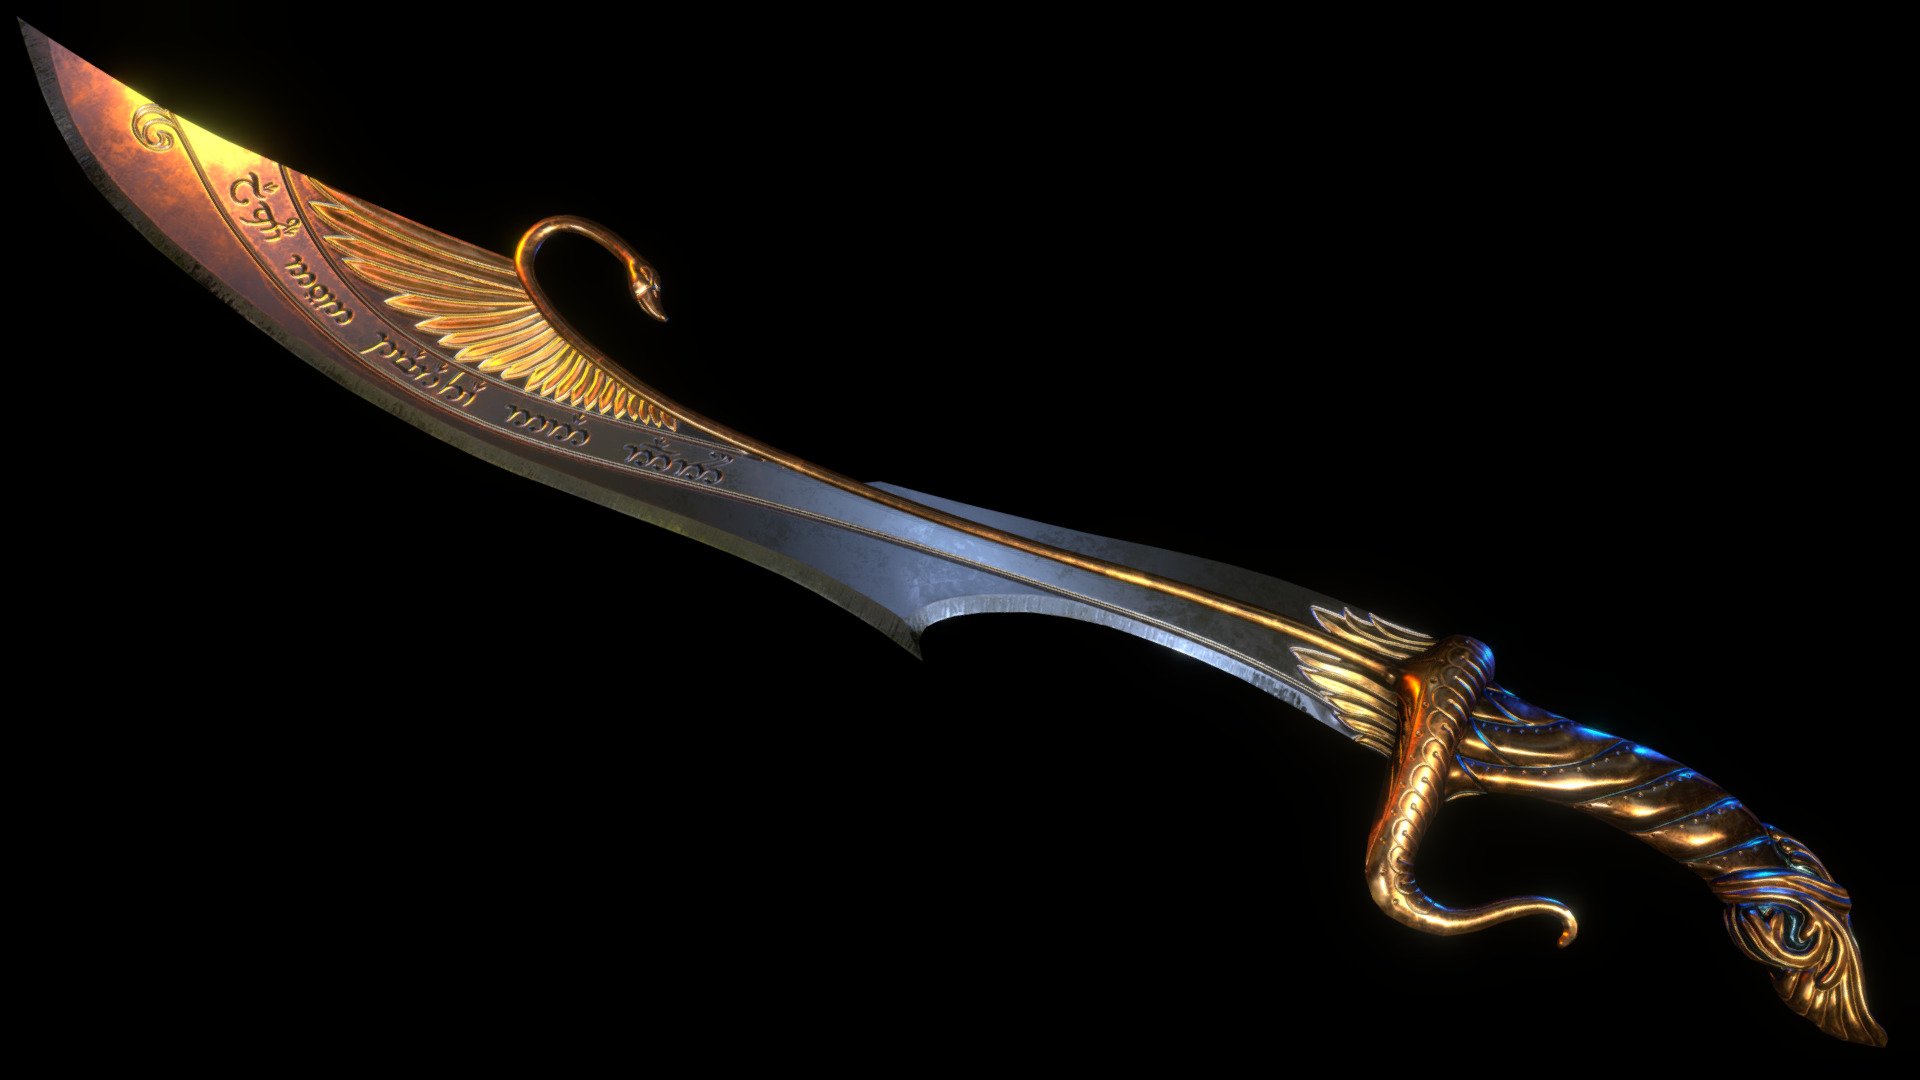 Original concept of a Noldorin Elvish sword, with a slight inspiration from the Malaysian Kelewang (for the upper curvature featuring the swan).



Twisted hilt, lower quillon curved backward, intricately designed pommel with Azurite inlay.

Runic inscription on the blade in Sindarin &ldquo;The dancing swan of the west